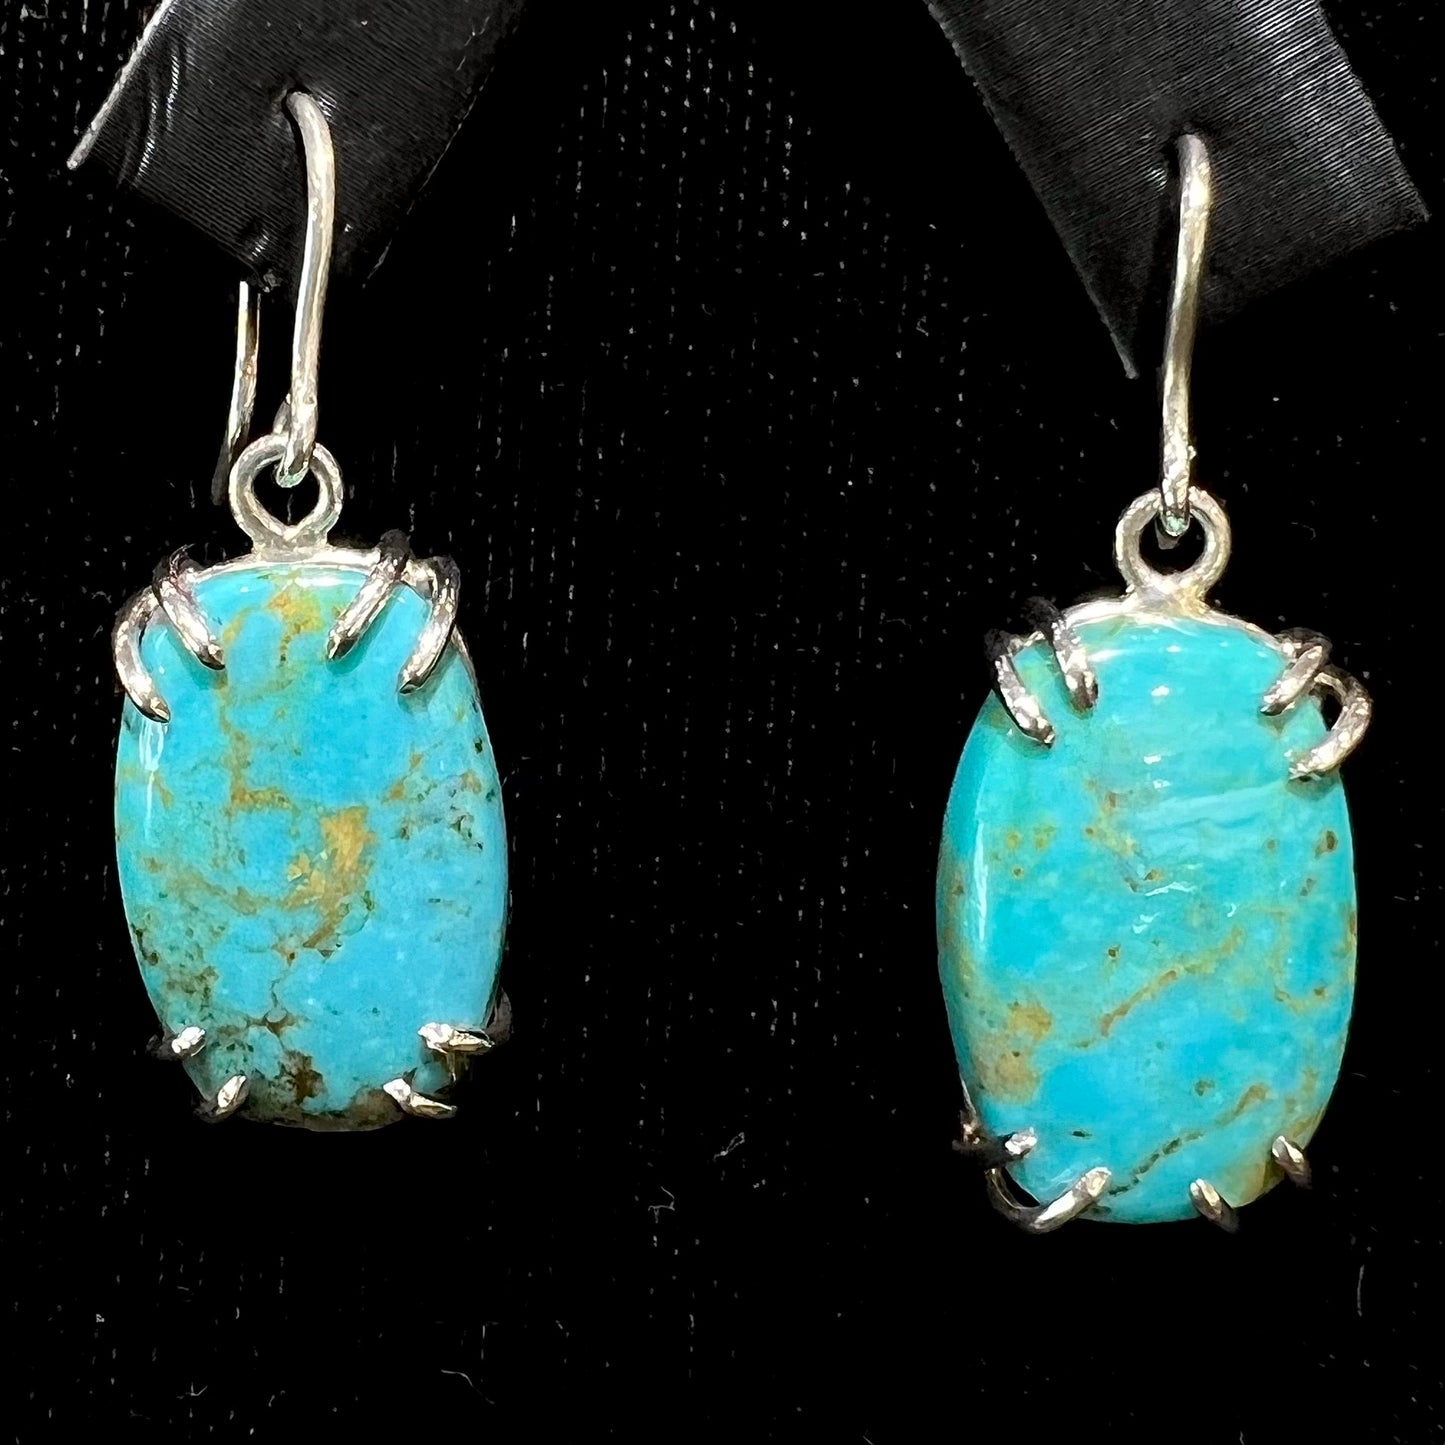 Sterling silver French wire earrings double prong set with cabochon cut Turquoise from Pilot Mountain Mine.